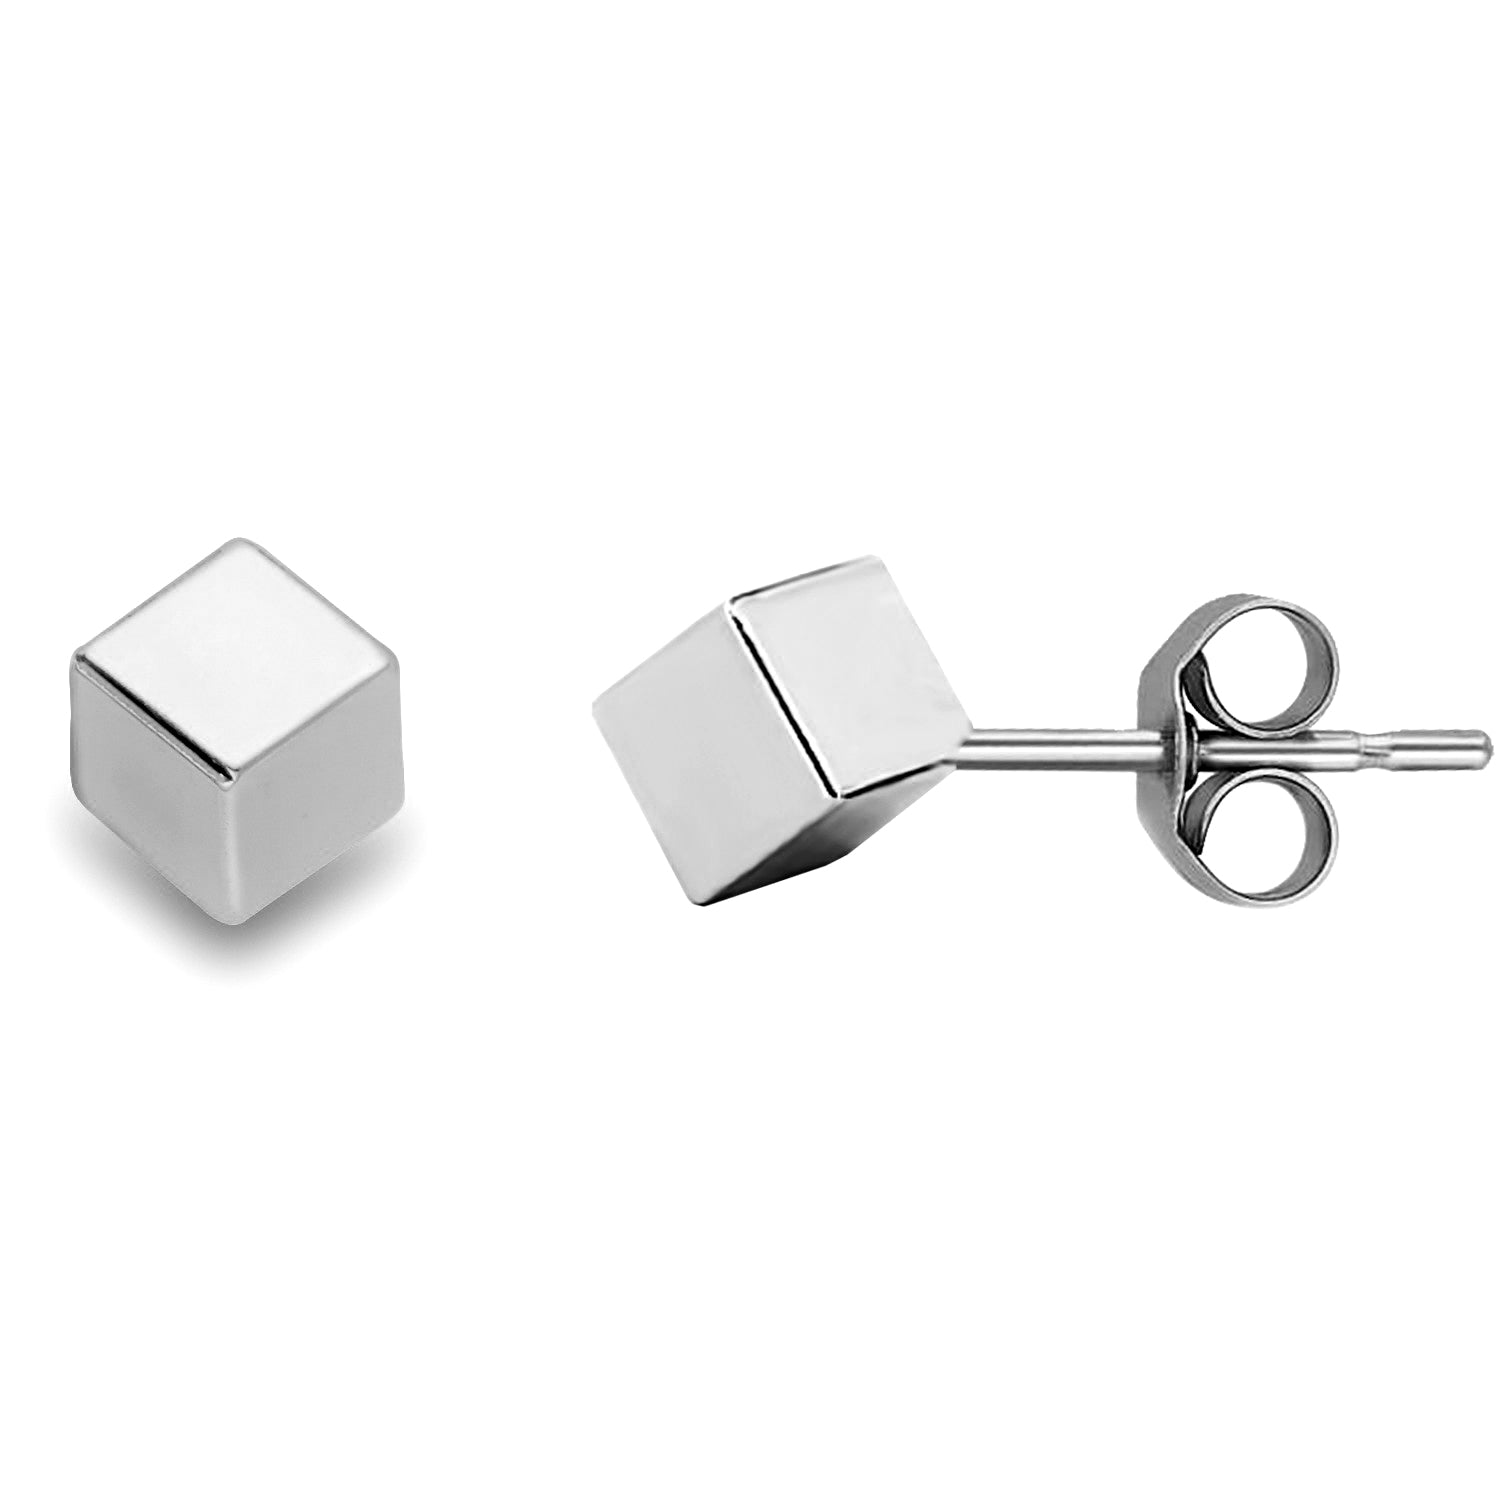 Ladies 9ct White Gold  Everyday Square Cube Stud Earrings - 4mm - SENR02173